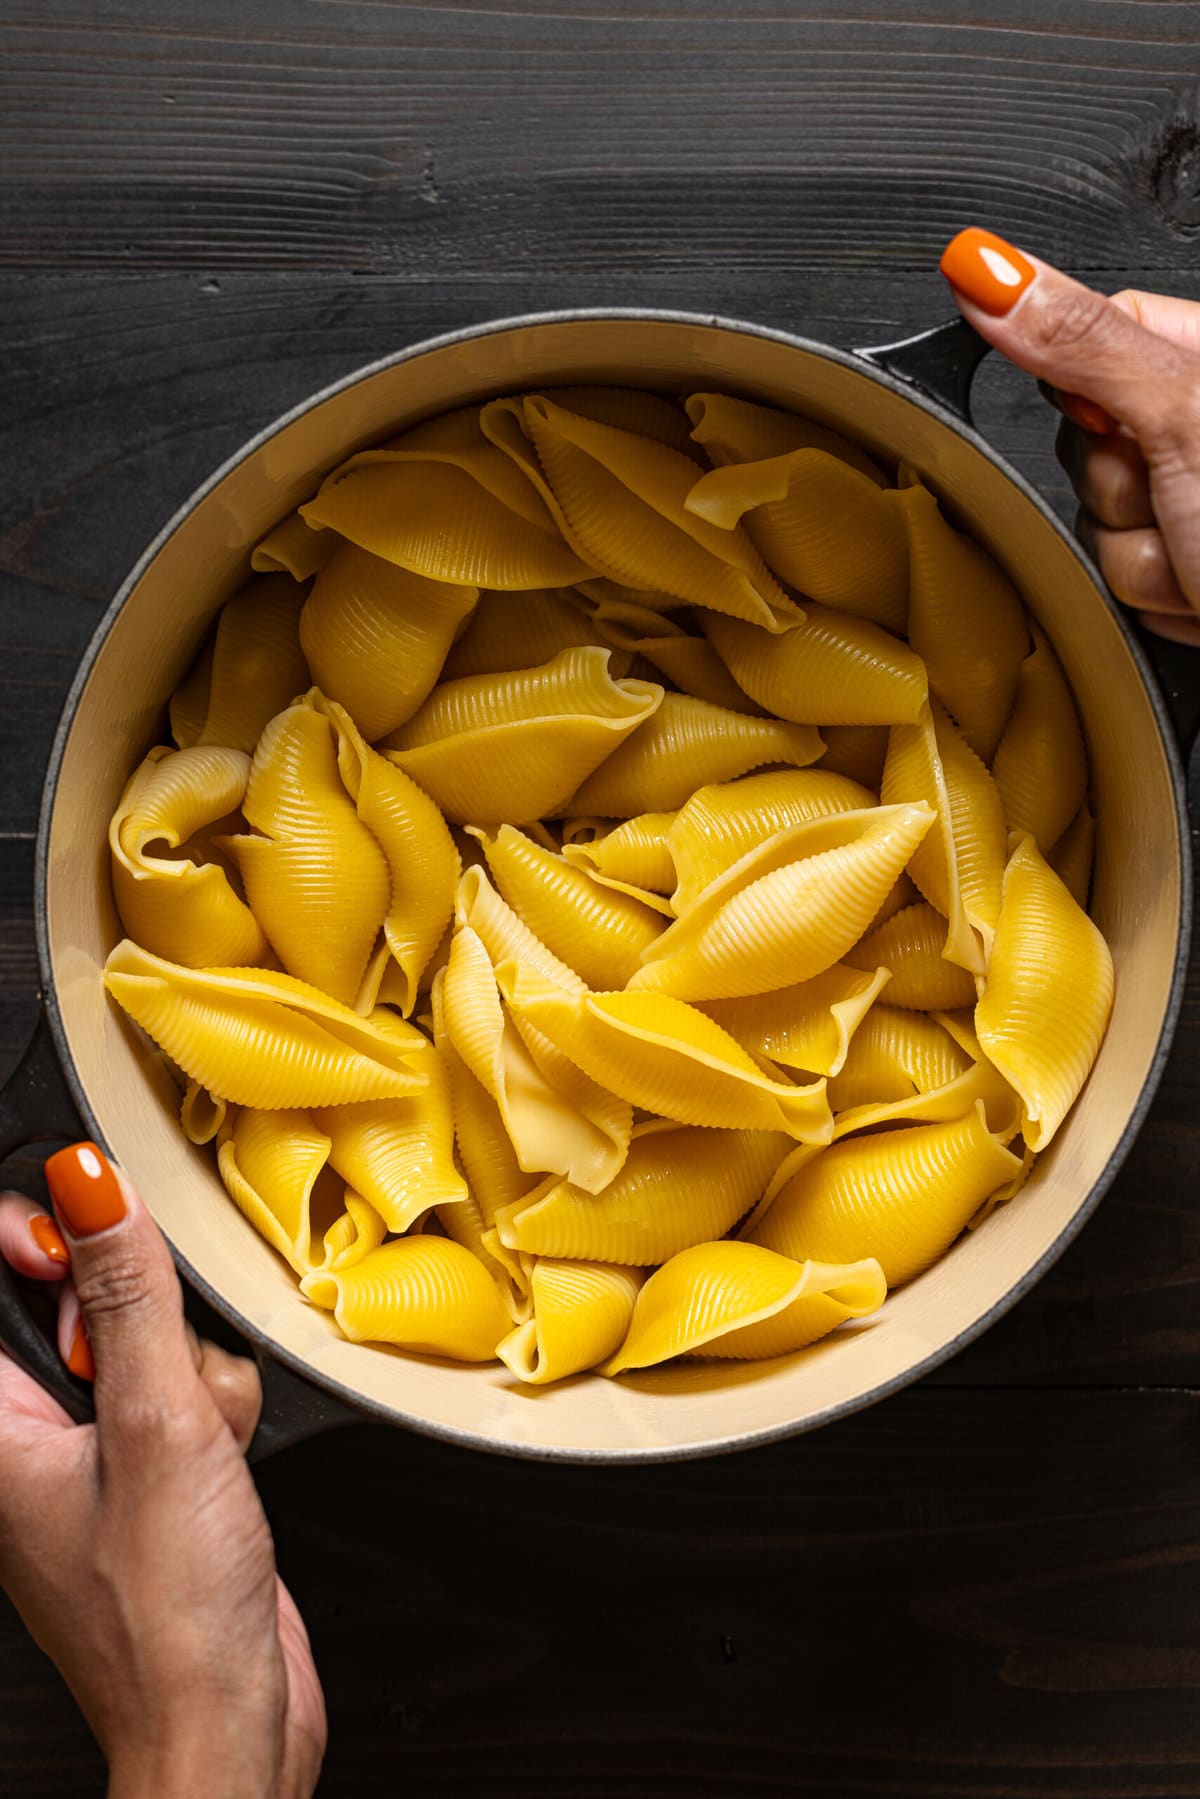 Cooked pasta shells in a pot being held.